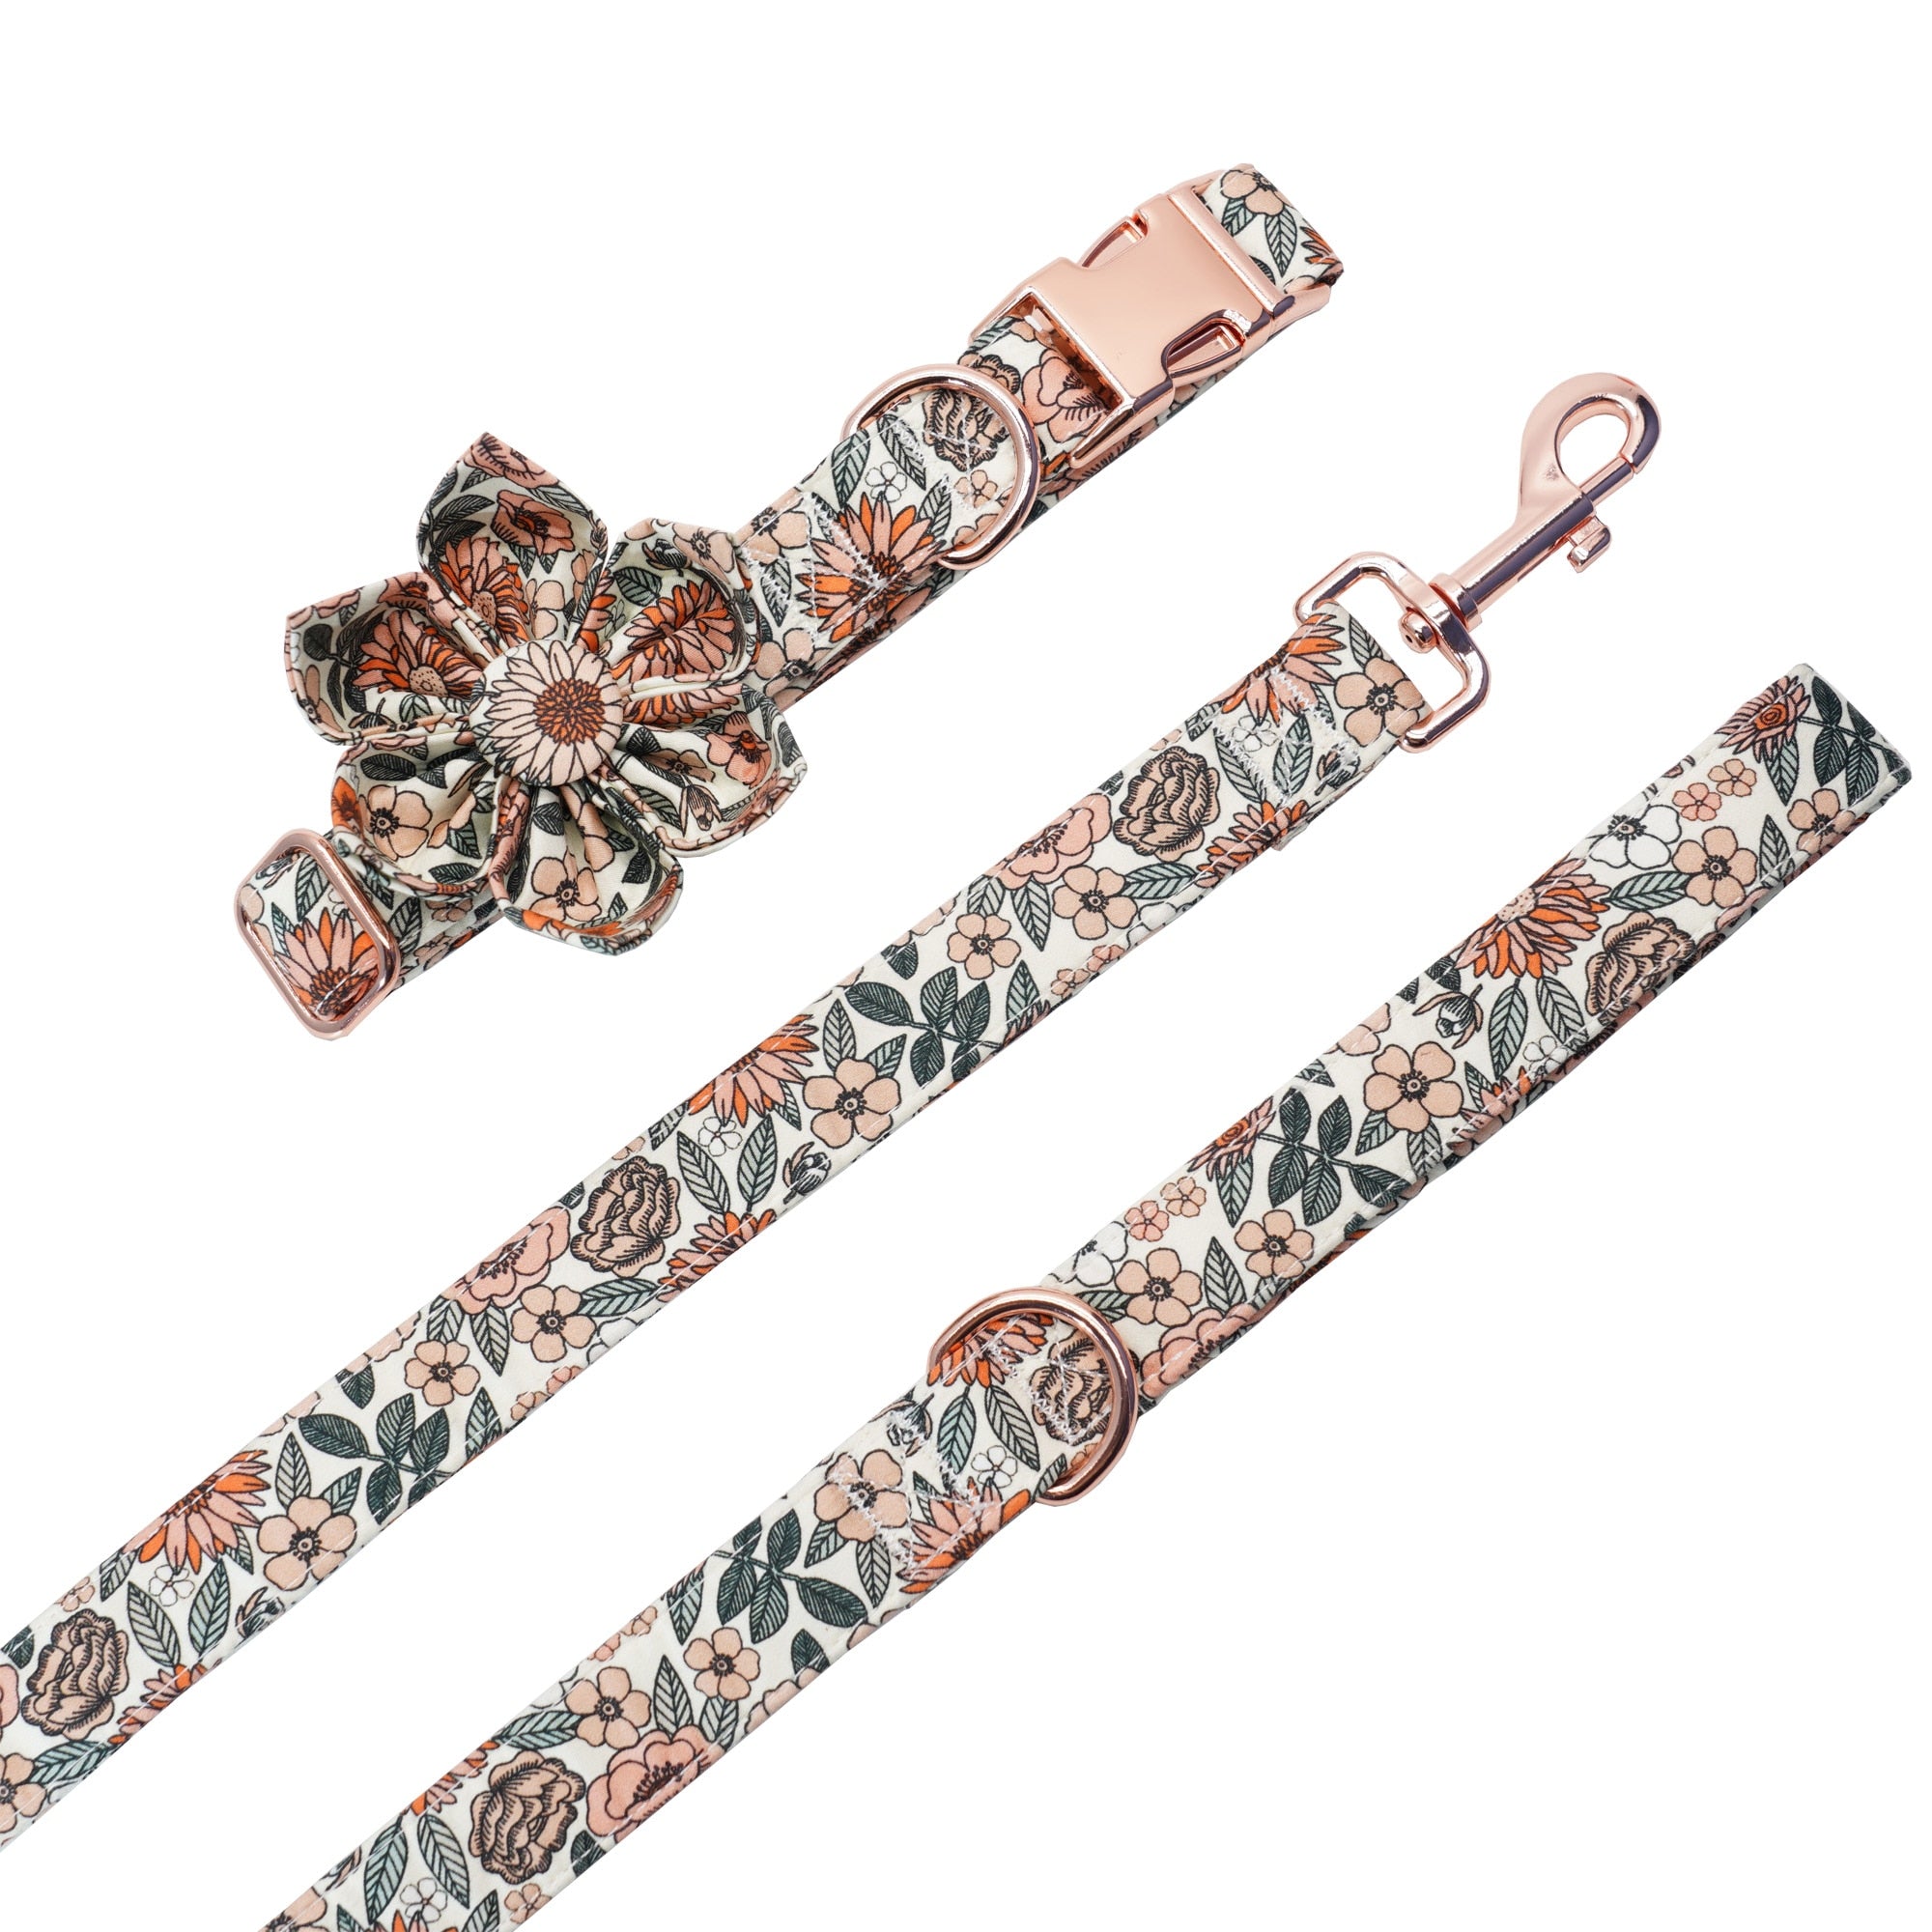 Boho Floral Set: Personalized Flower Collar/Bow collar, Harness, Leash, Poopbag, And Bandana.